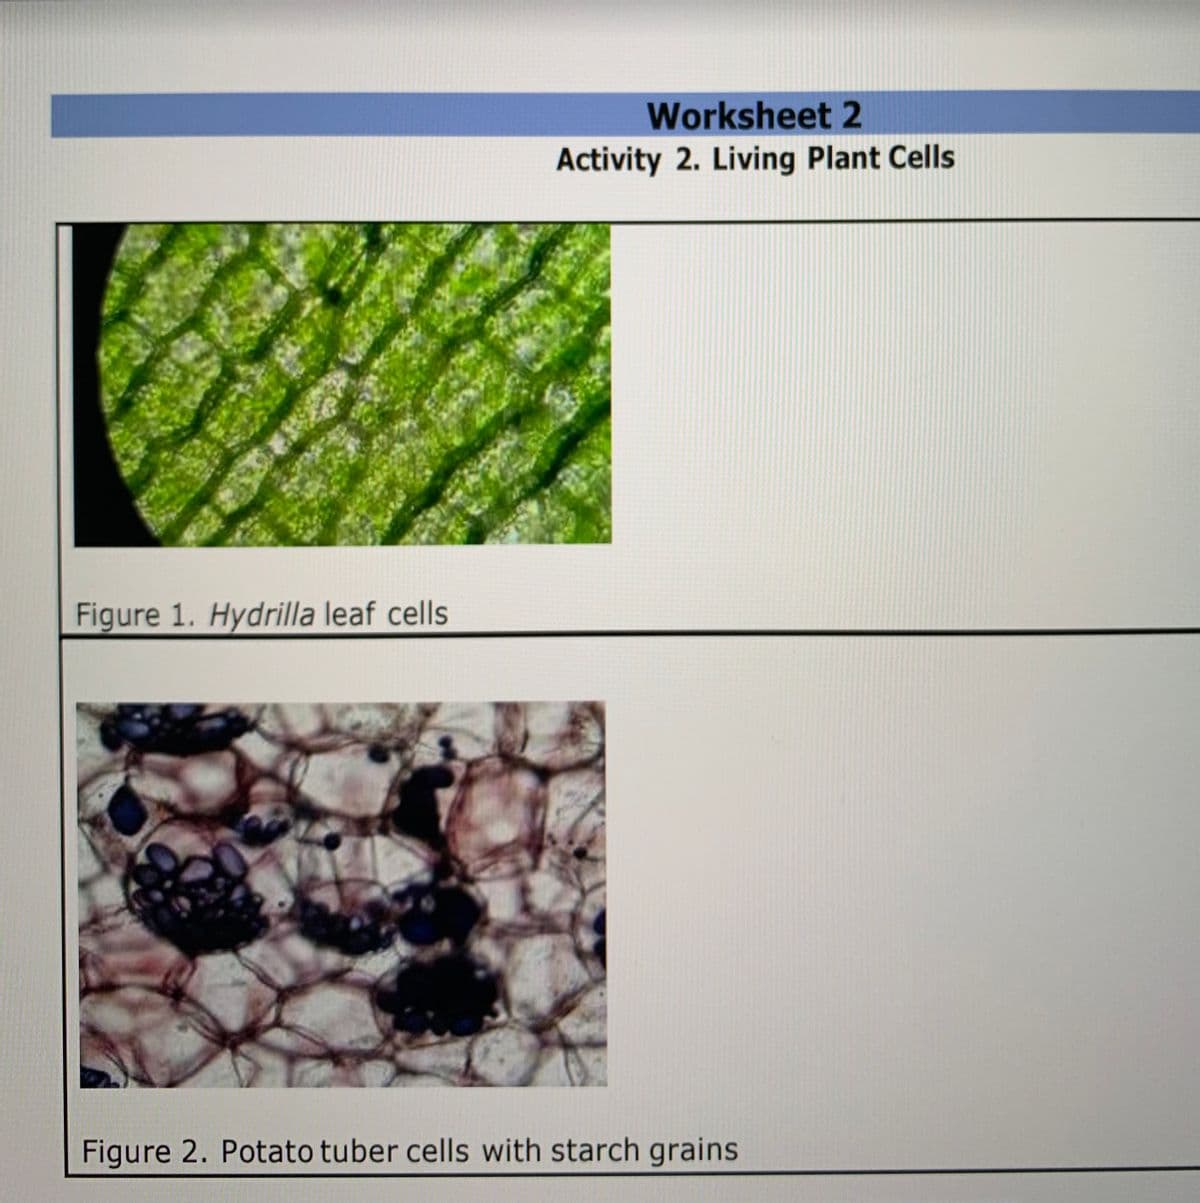 Worksheet 2
Activity 2. Living Plant Cells
Figure 1. Hydrilla leaf cells
Figure 2. Potato tuber cells with starch grains
